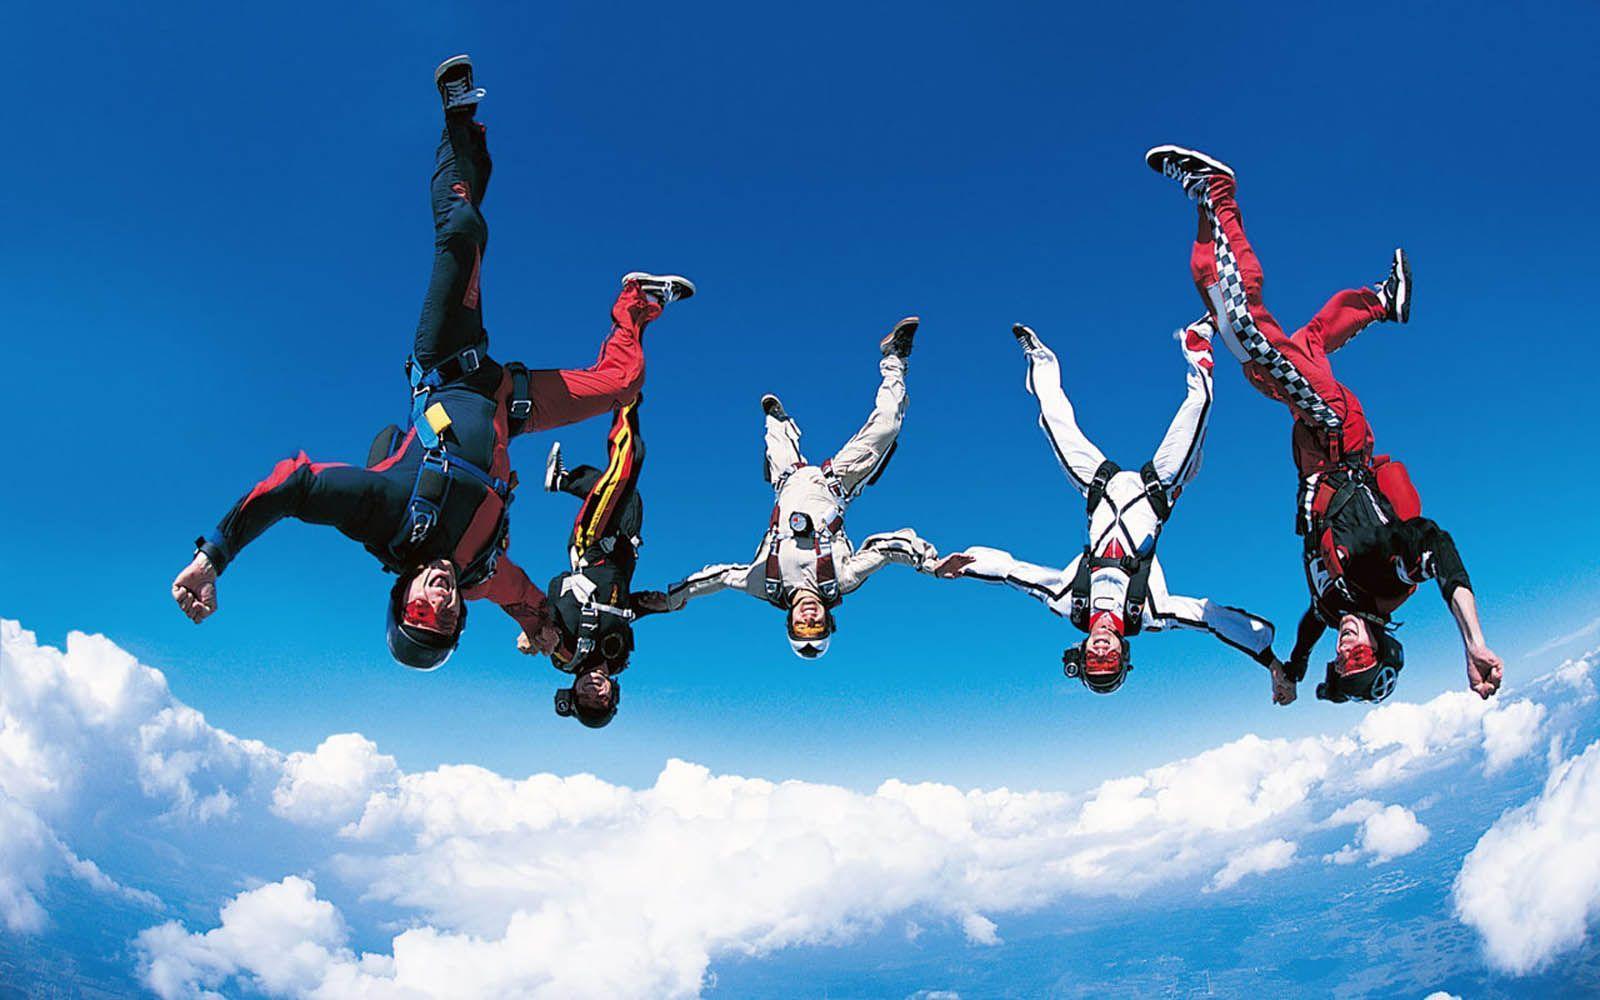 Skydiving Wallpaper High Quality